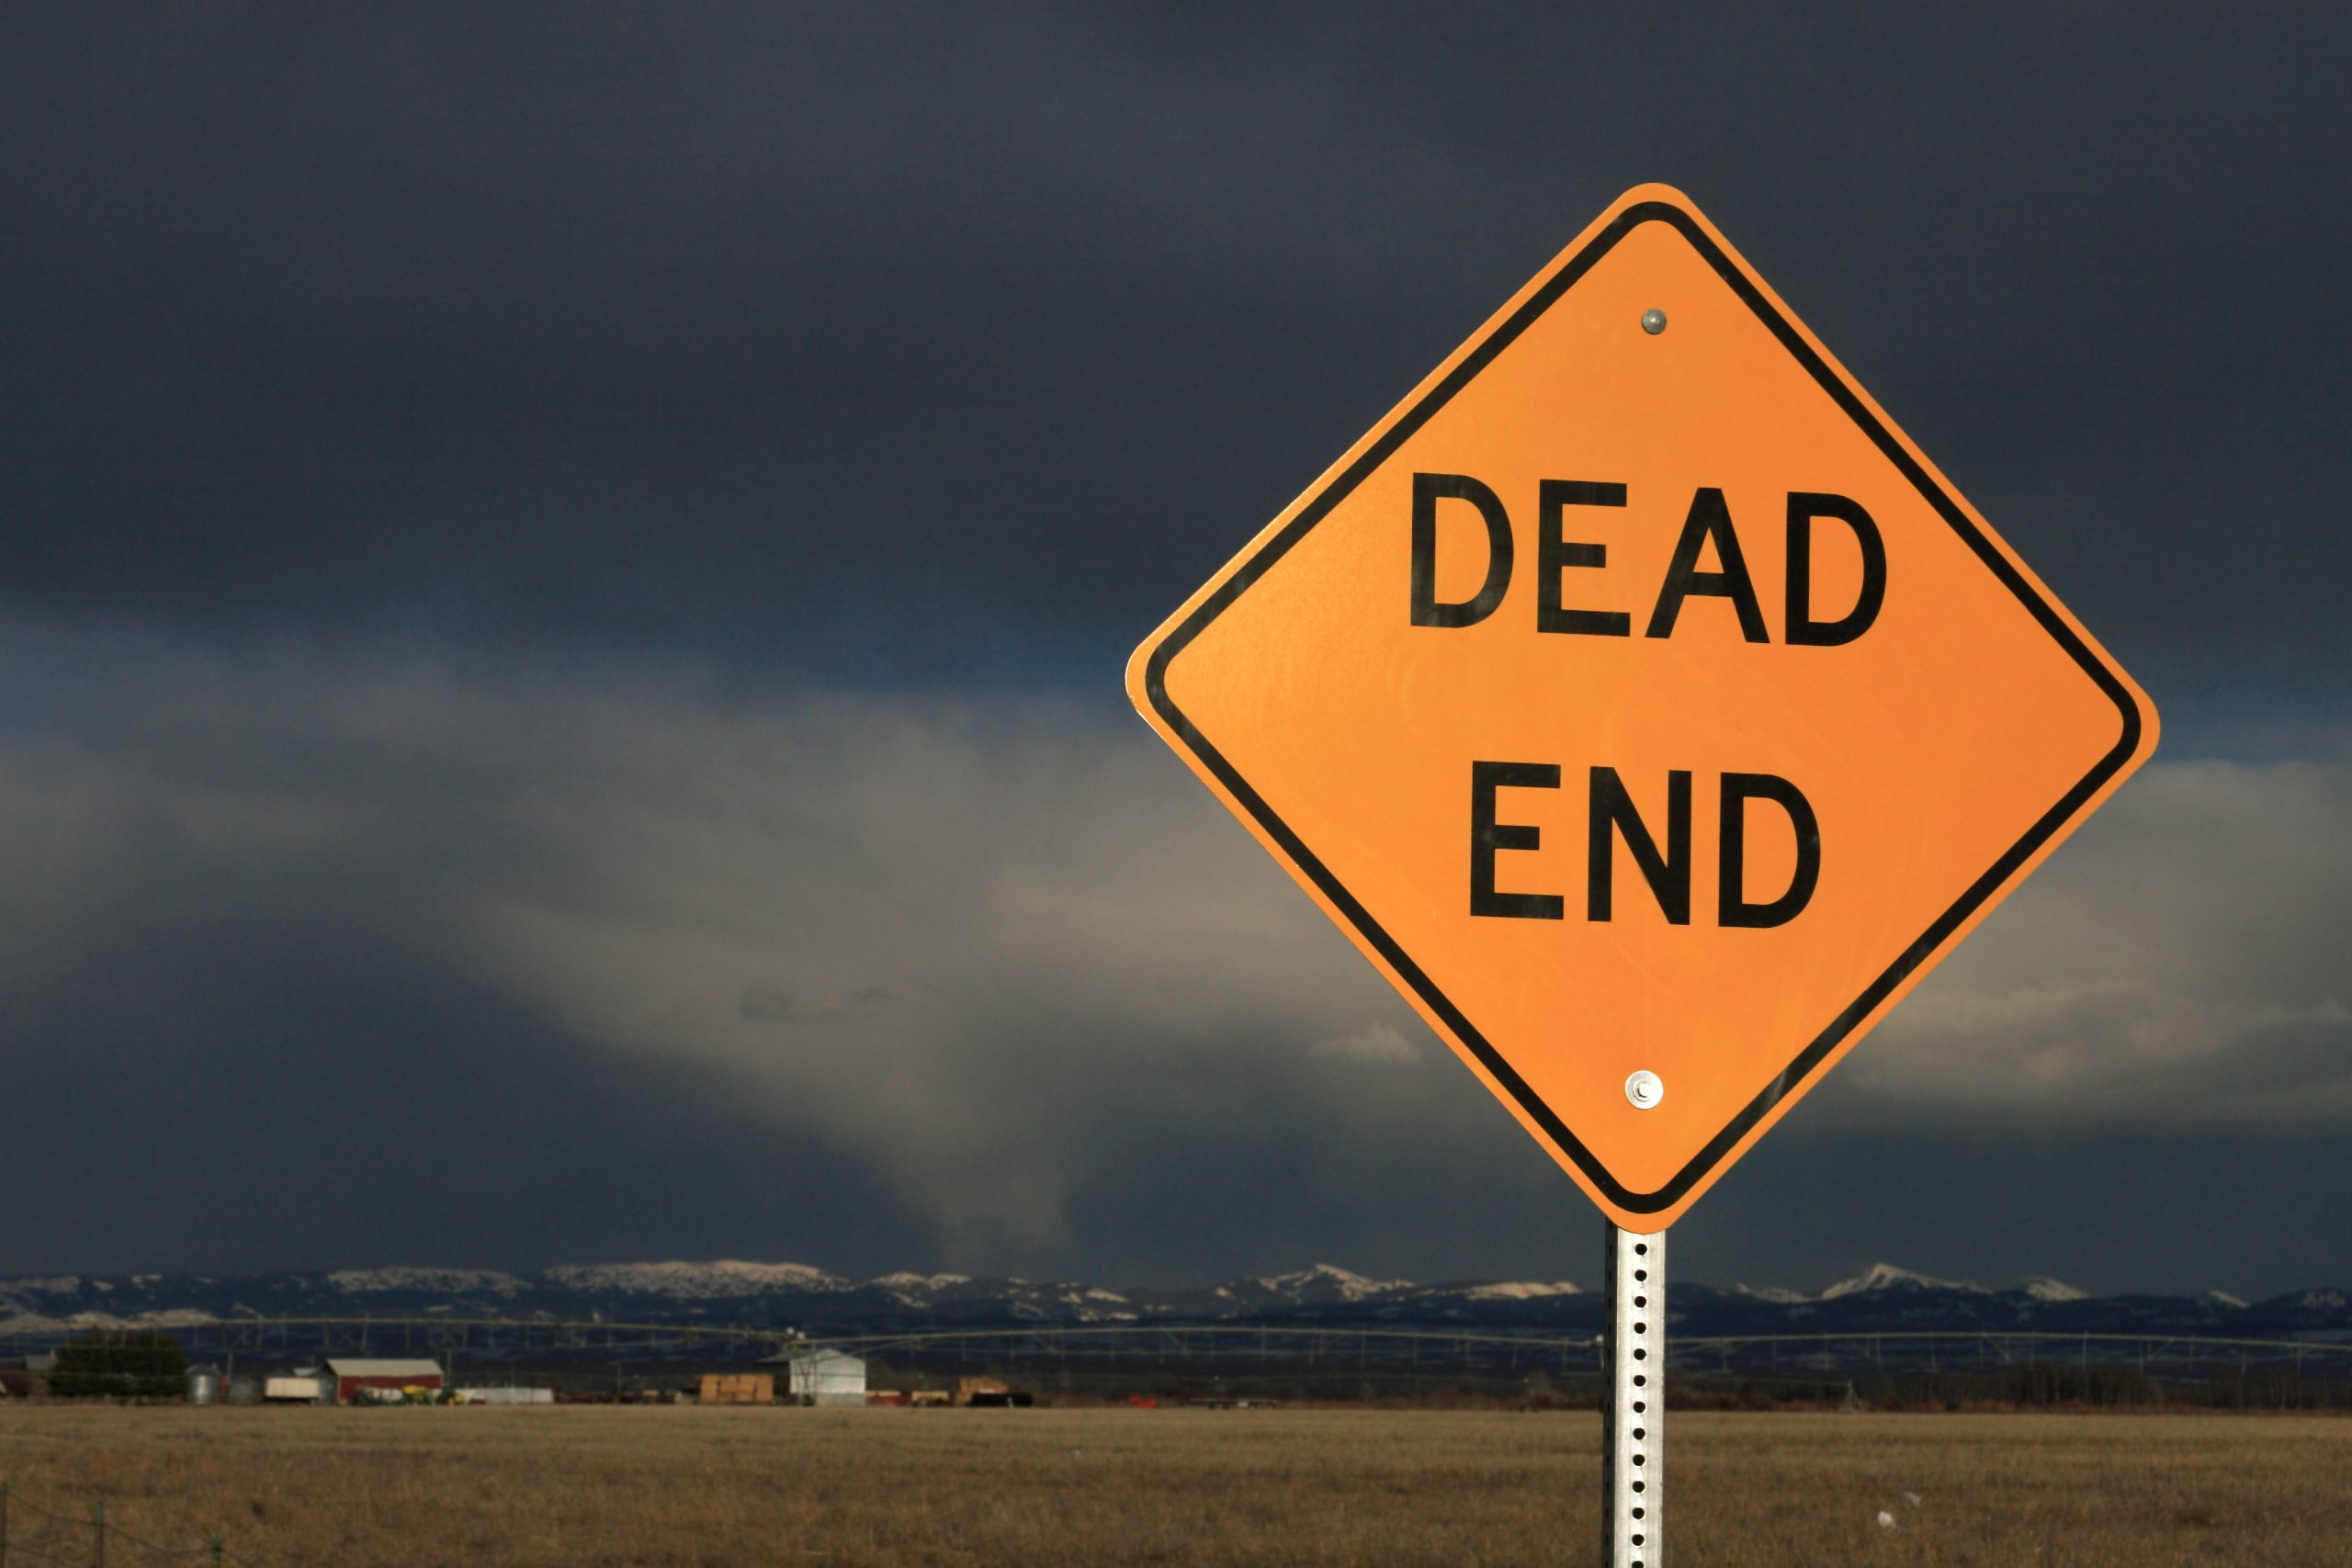 5 Reasons Why New Leads Turn Into Deadends